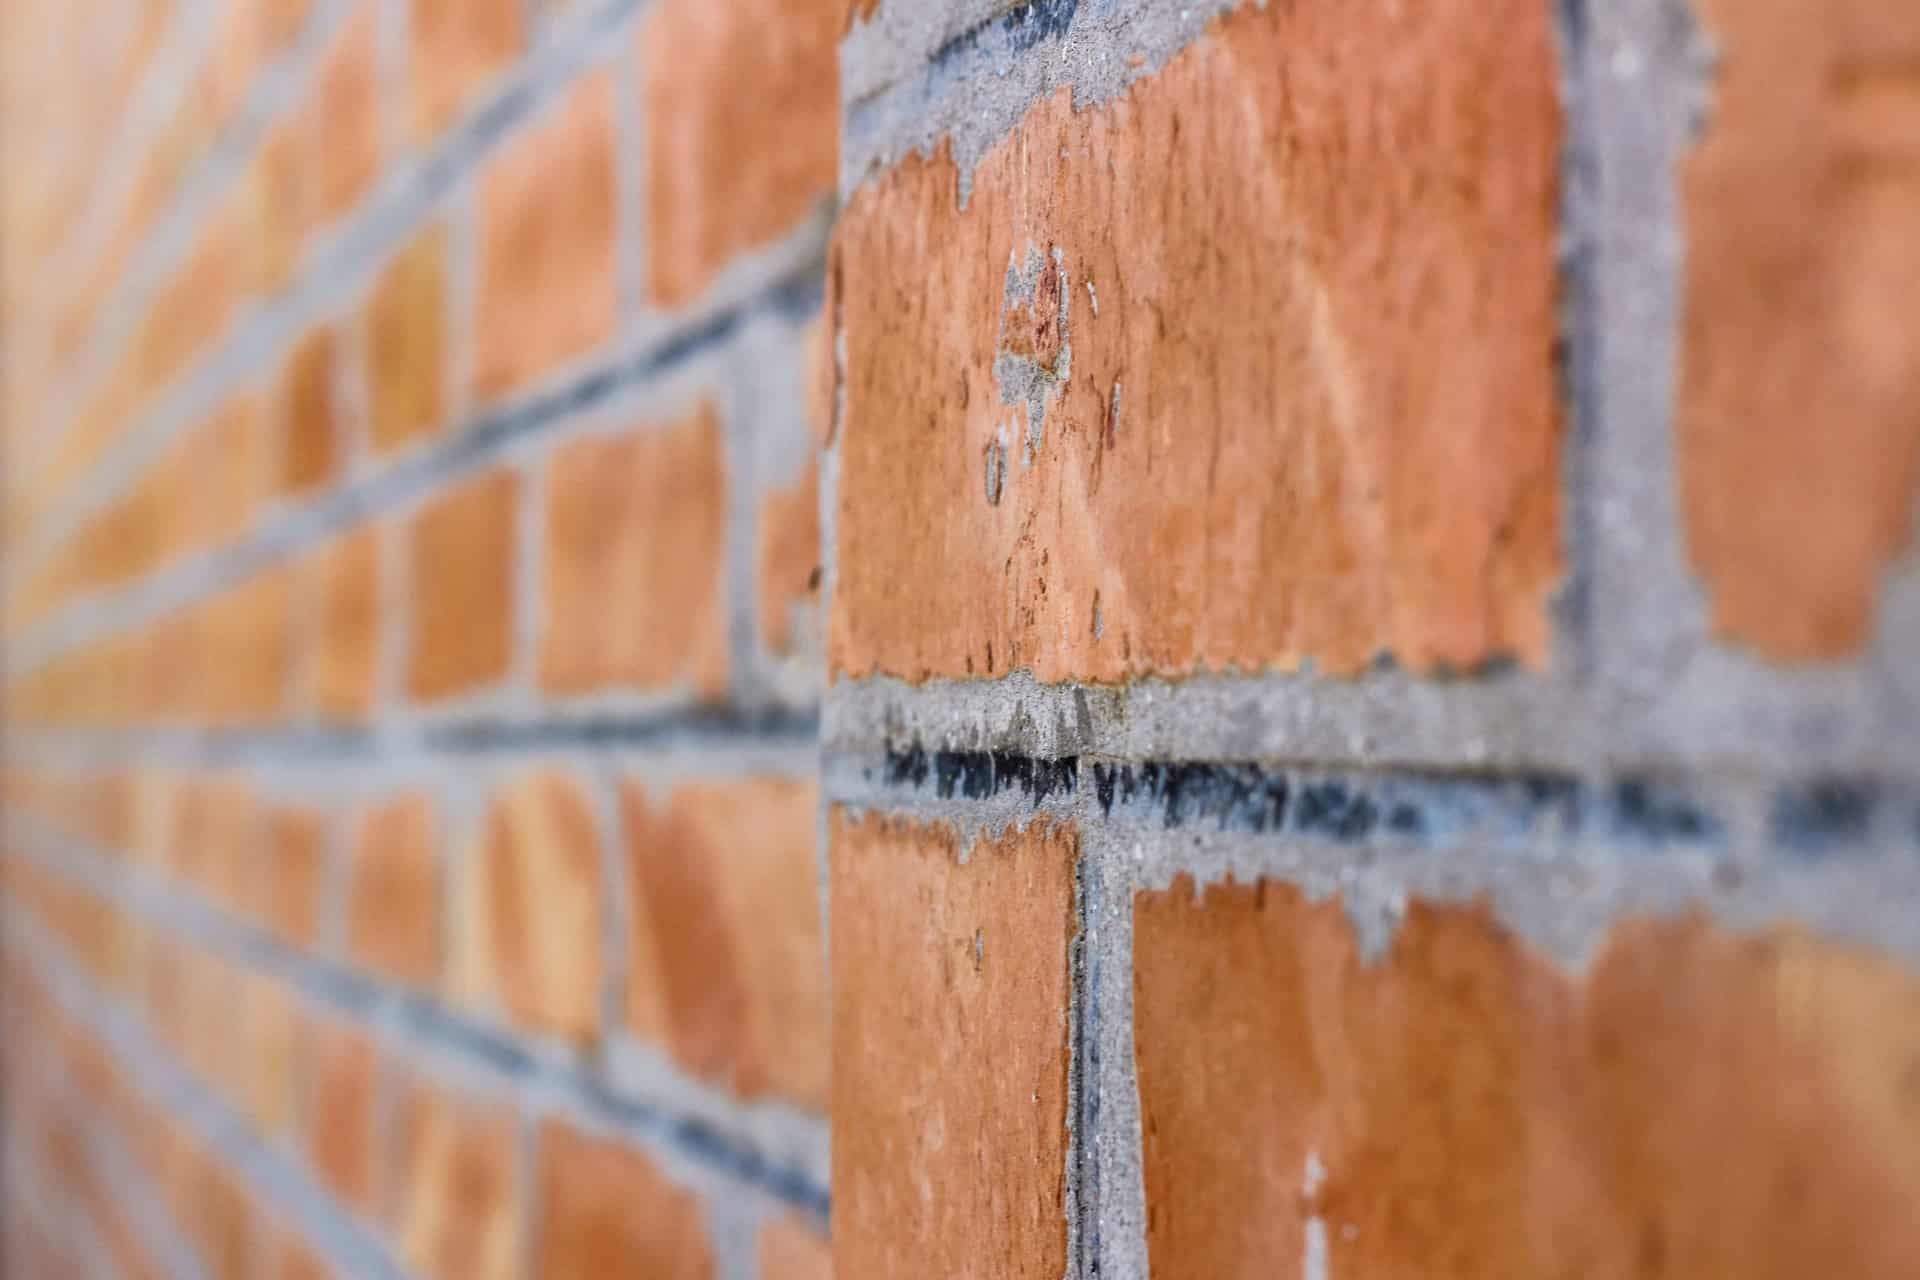 A perfect wall thanks to your efforts to choose the right mortar type for your masonry project